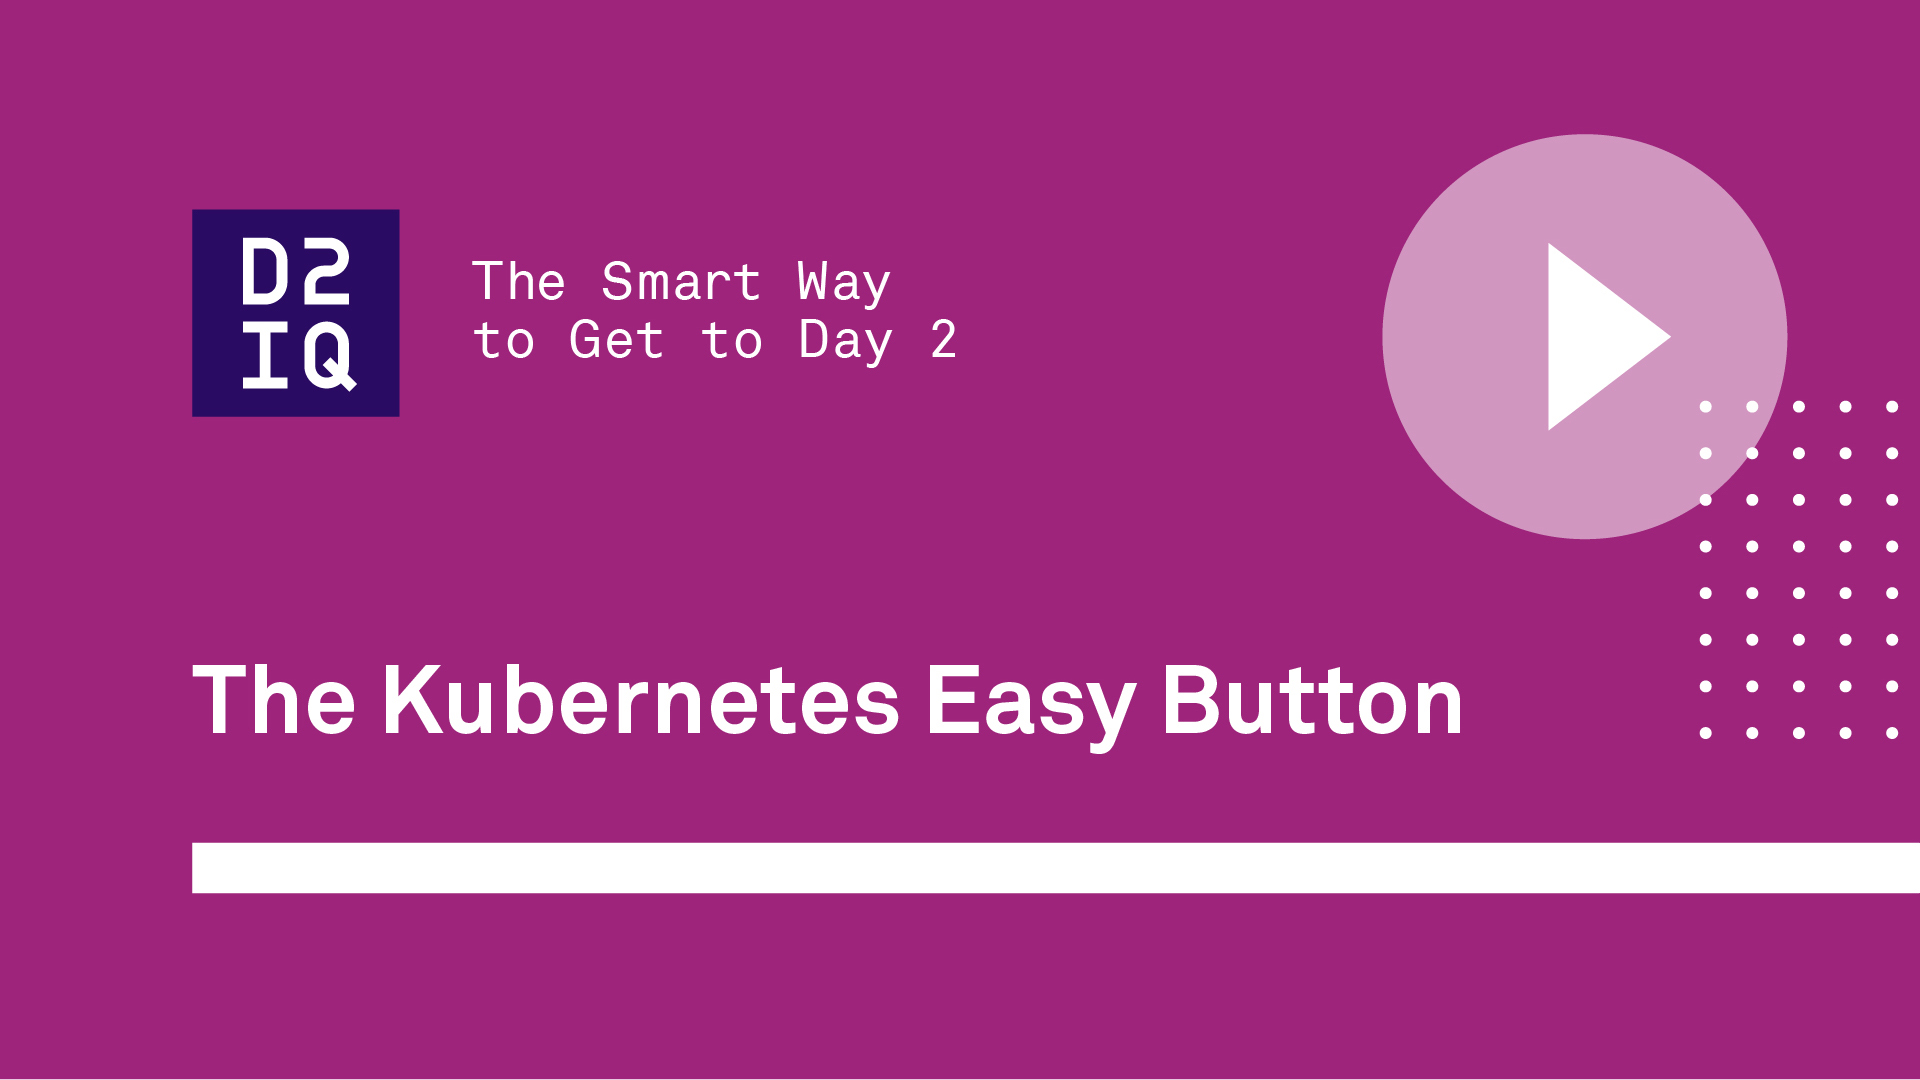 The Kubernetes Easy Button